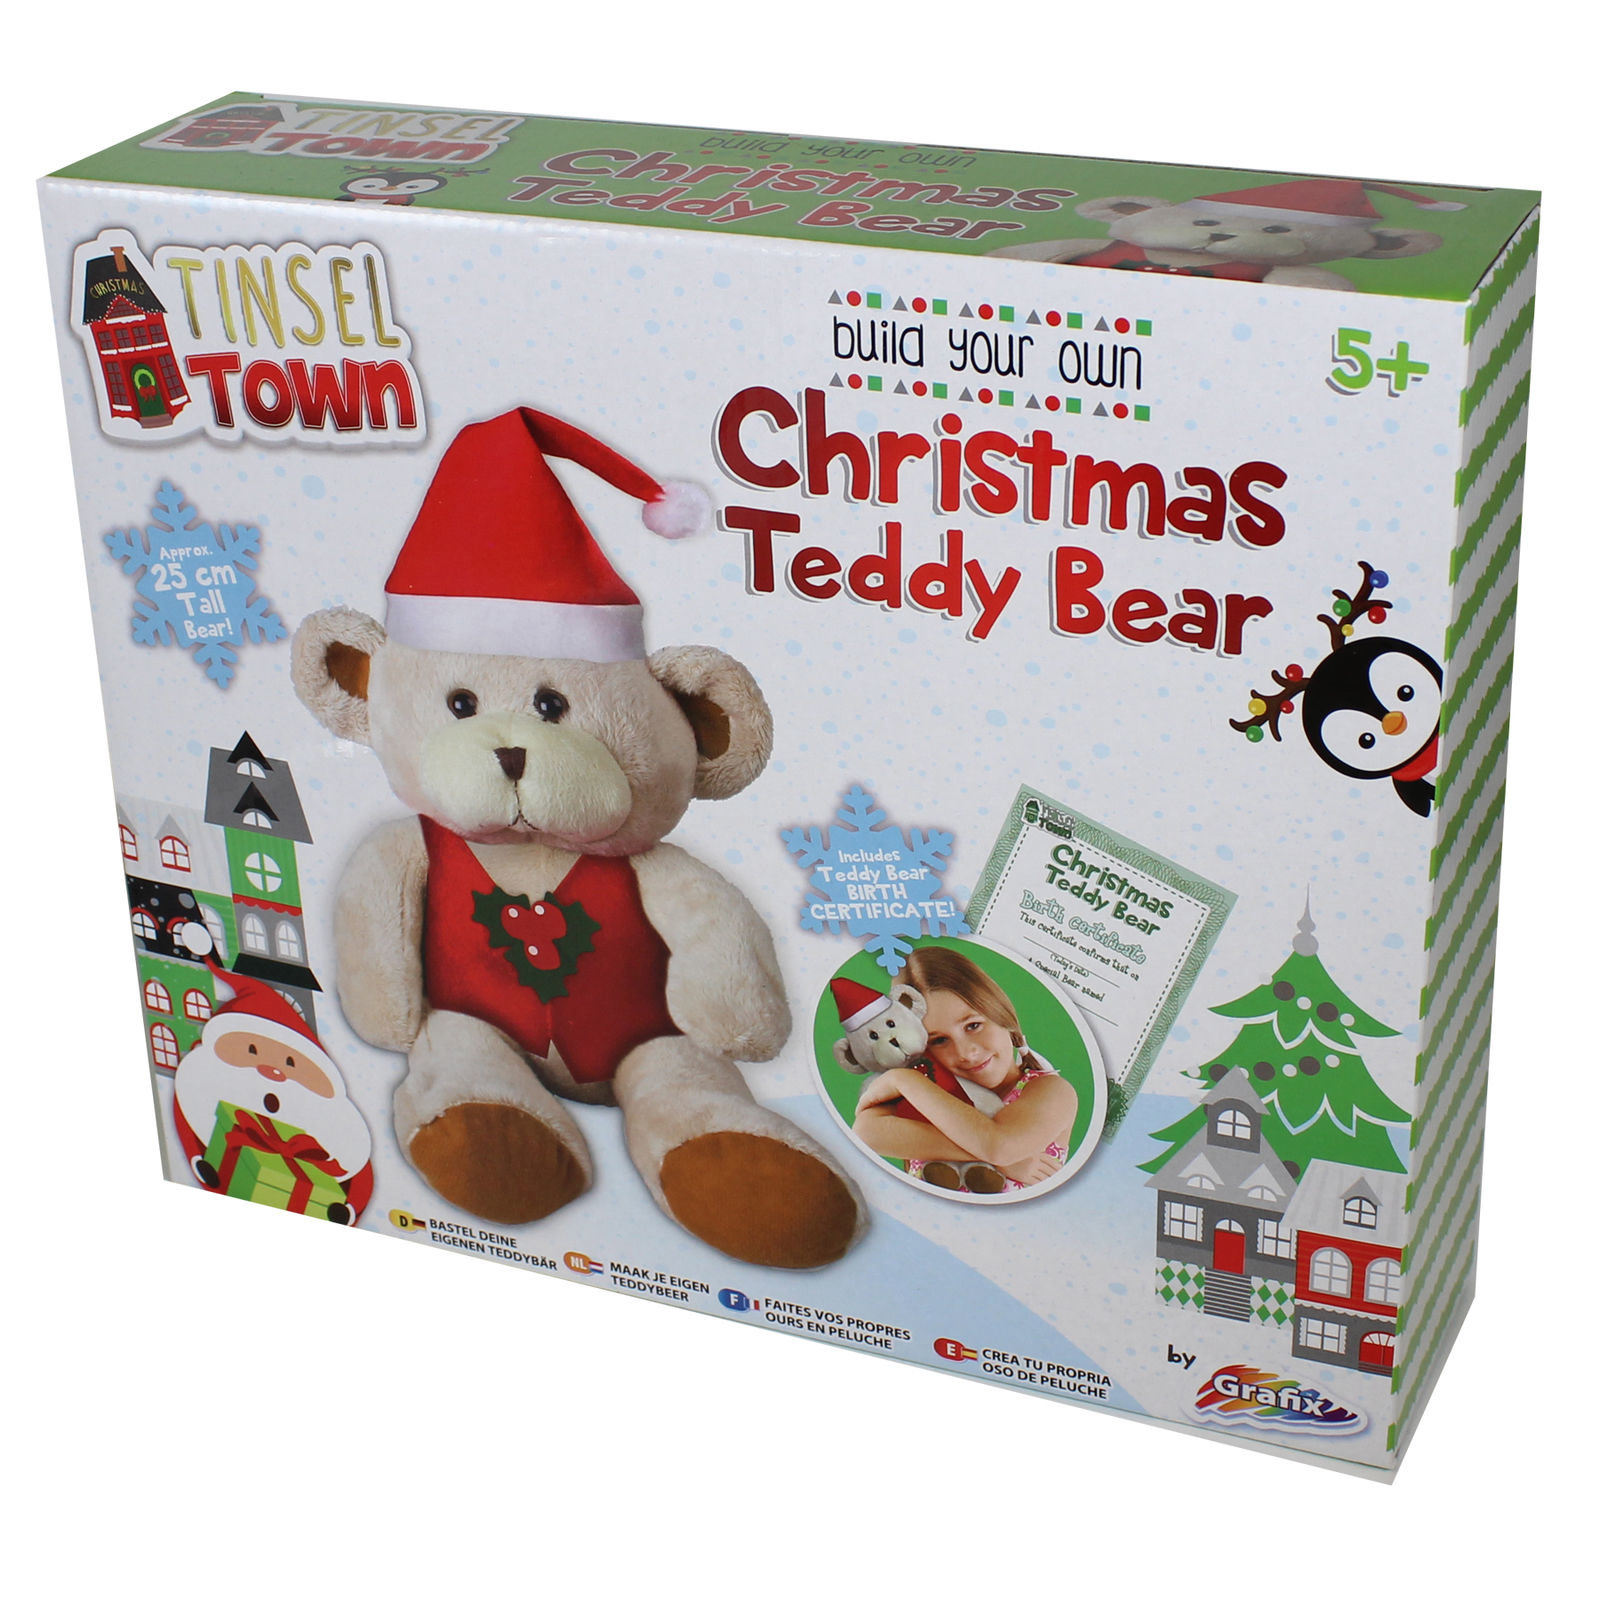 Tinsel Town Build your own Christmas Teddy Bear Soft Toy  Age 5+